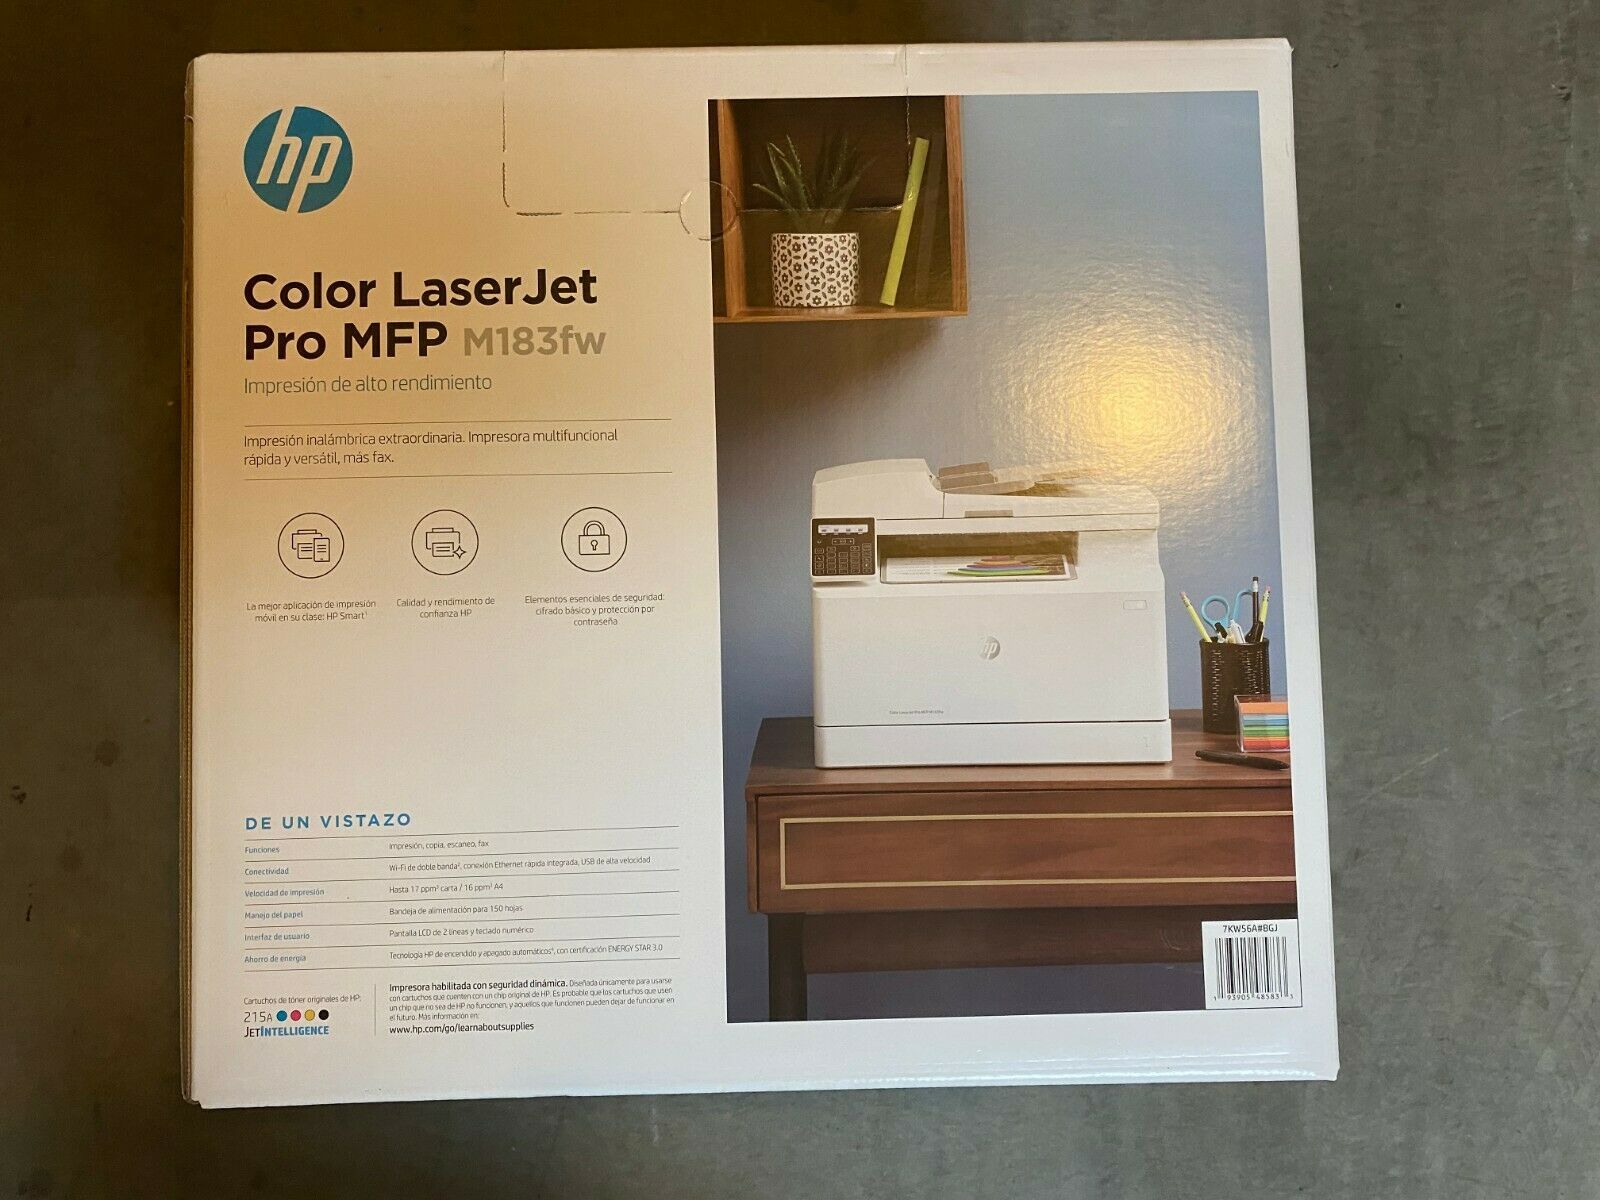 Hp Color Laser Jet Pro Mfp M183fw Printer and 50 similar items